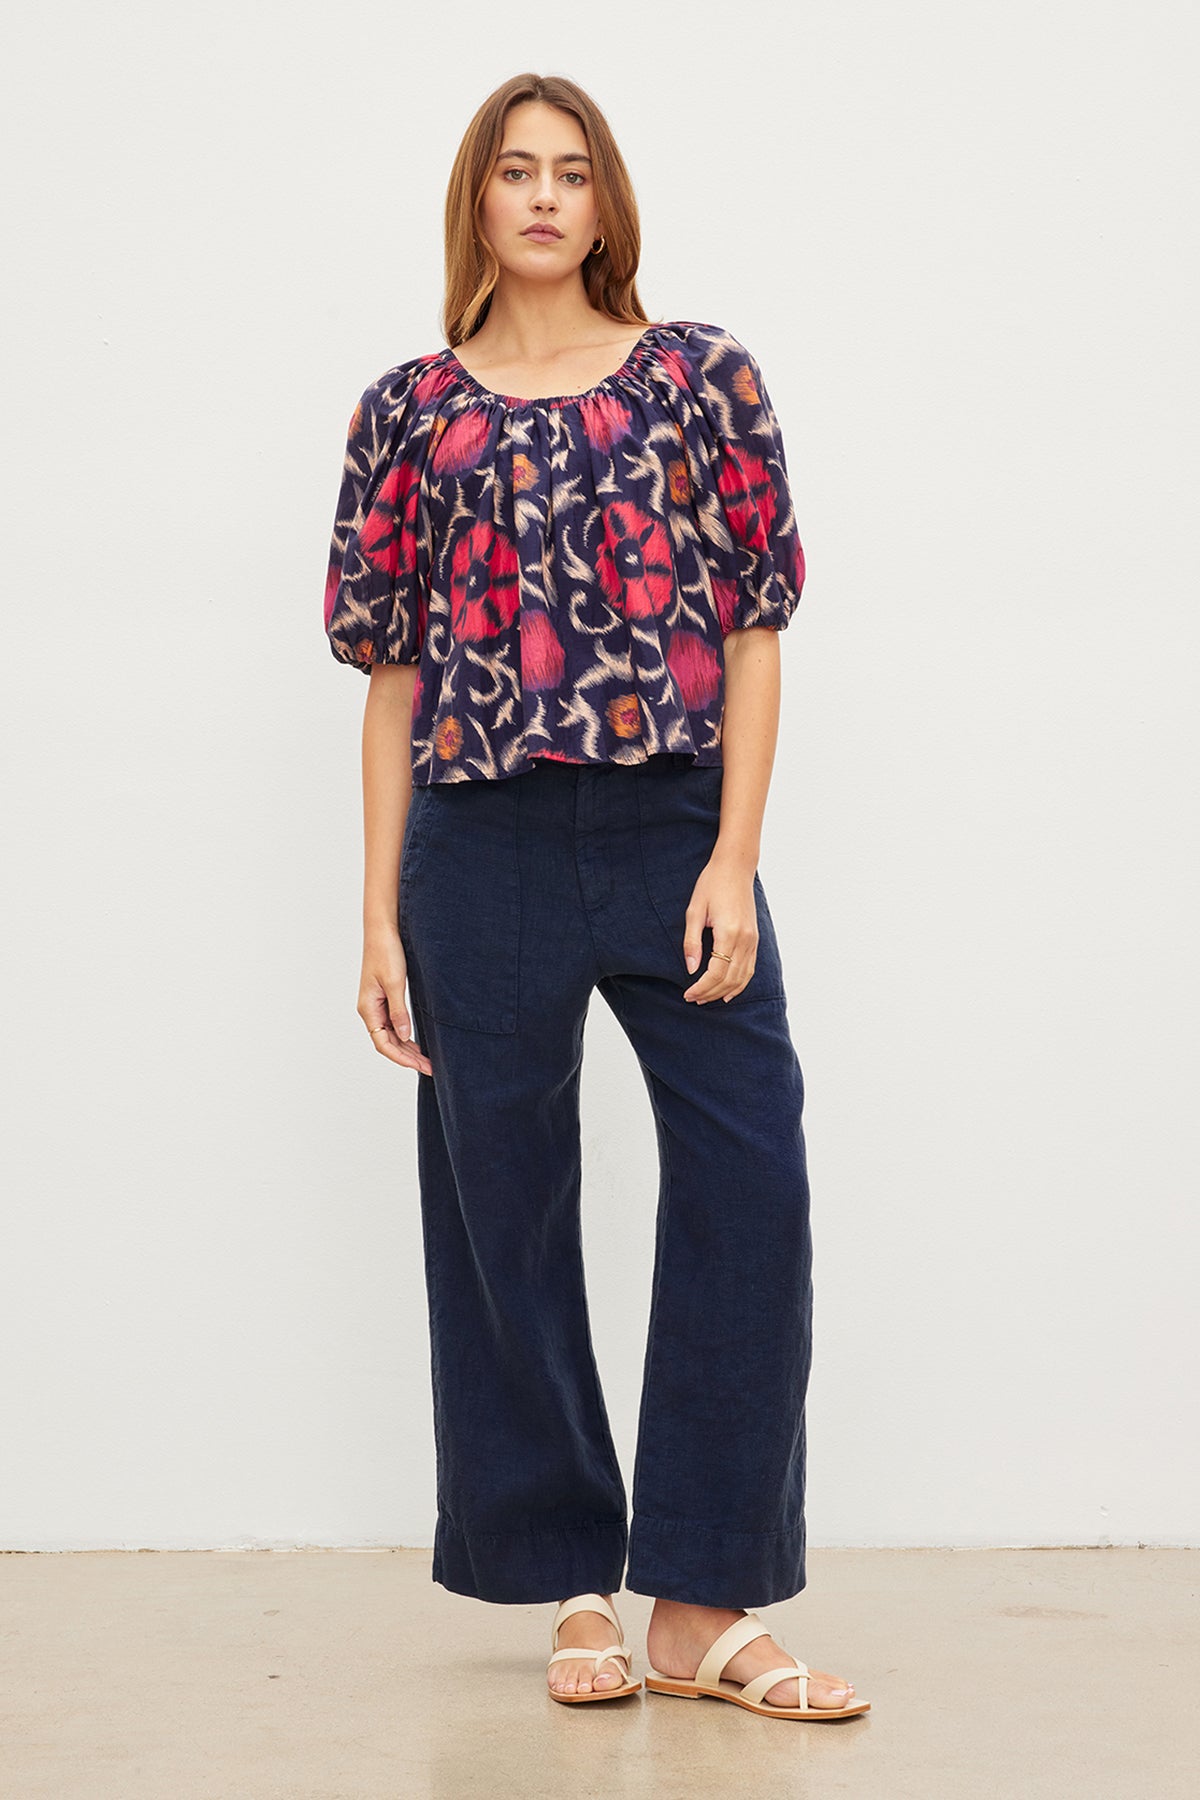 The stylish model is wearing a cool Velvet by Graham & Spencer navy floral top and wide leg pants.